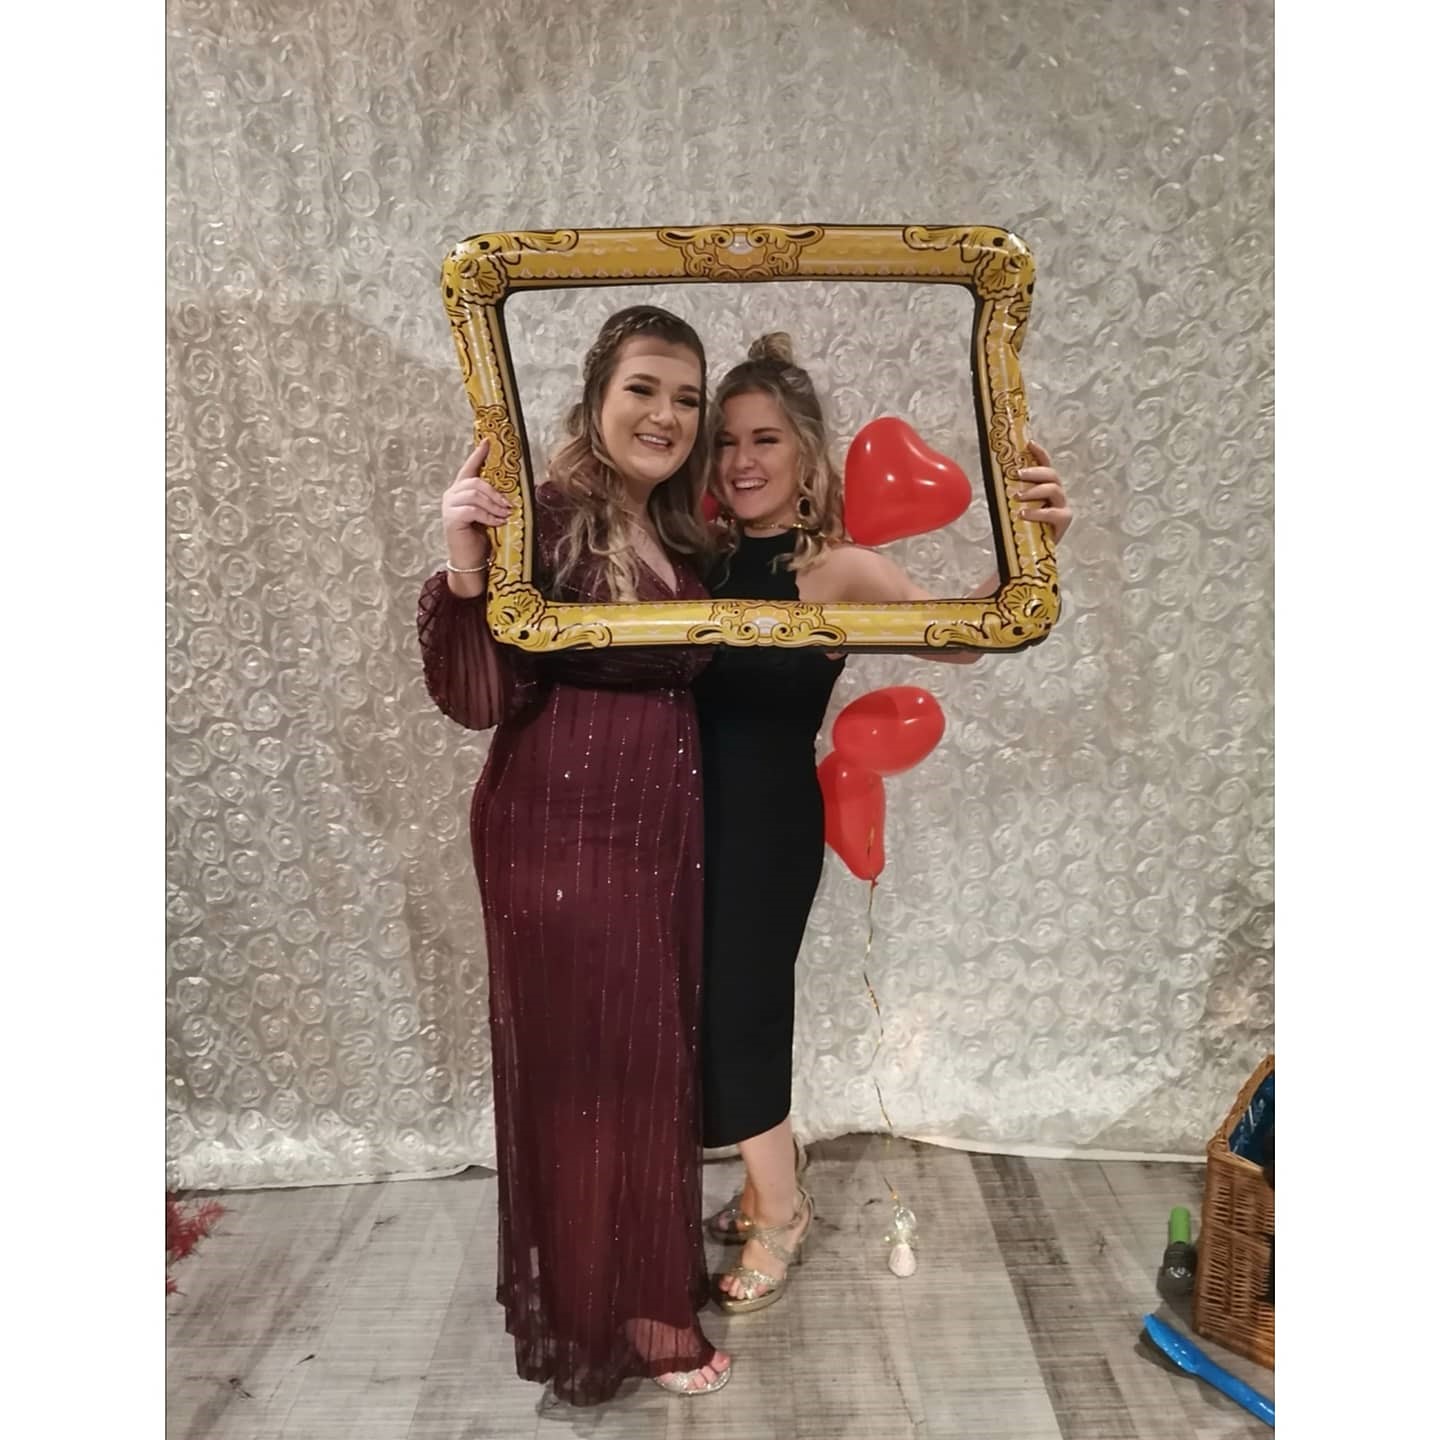 Photo of Amy and Charlotte posing for a photo at an event